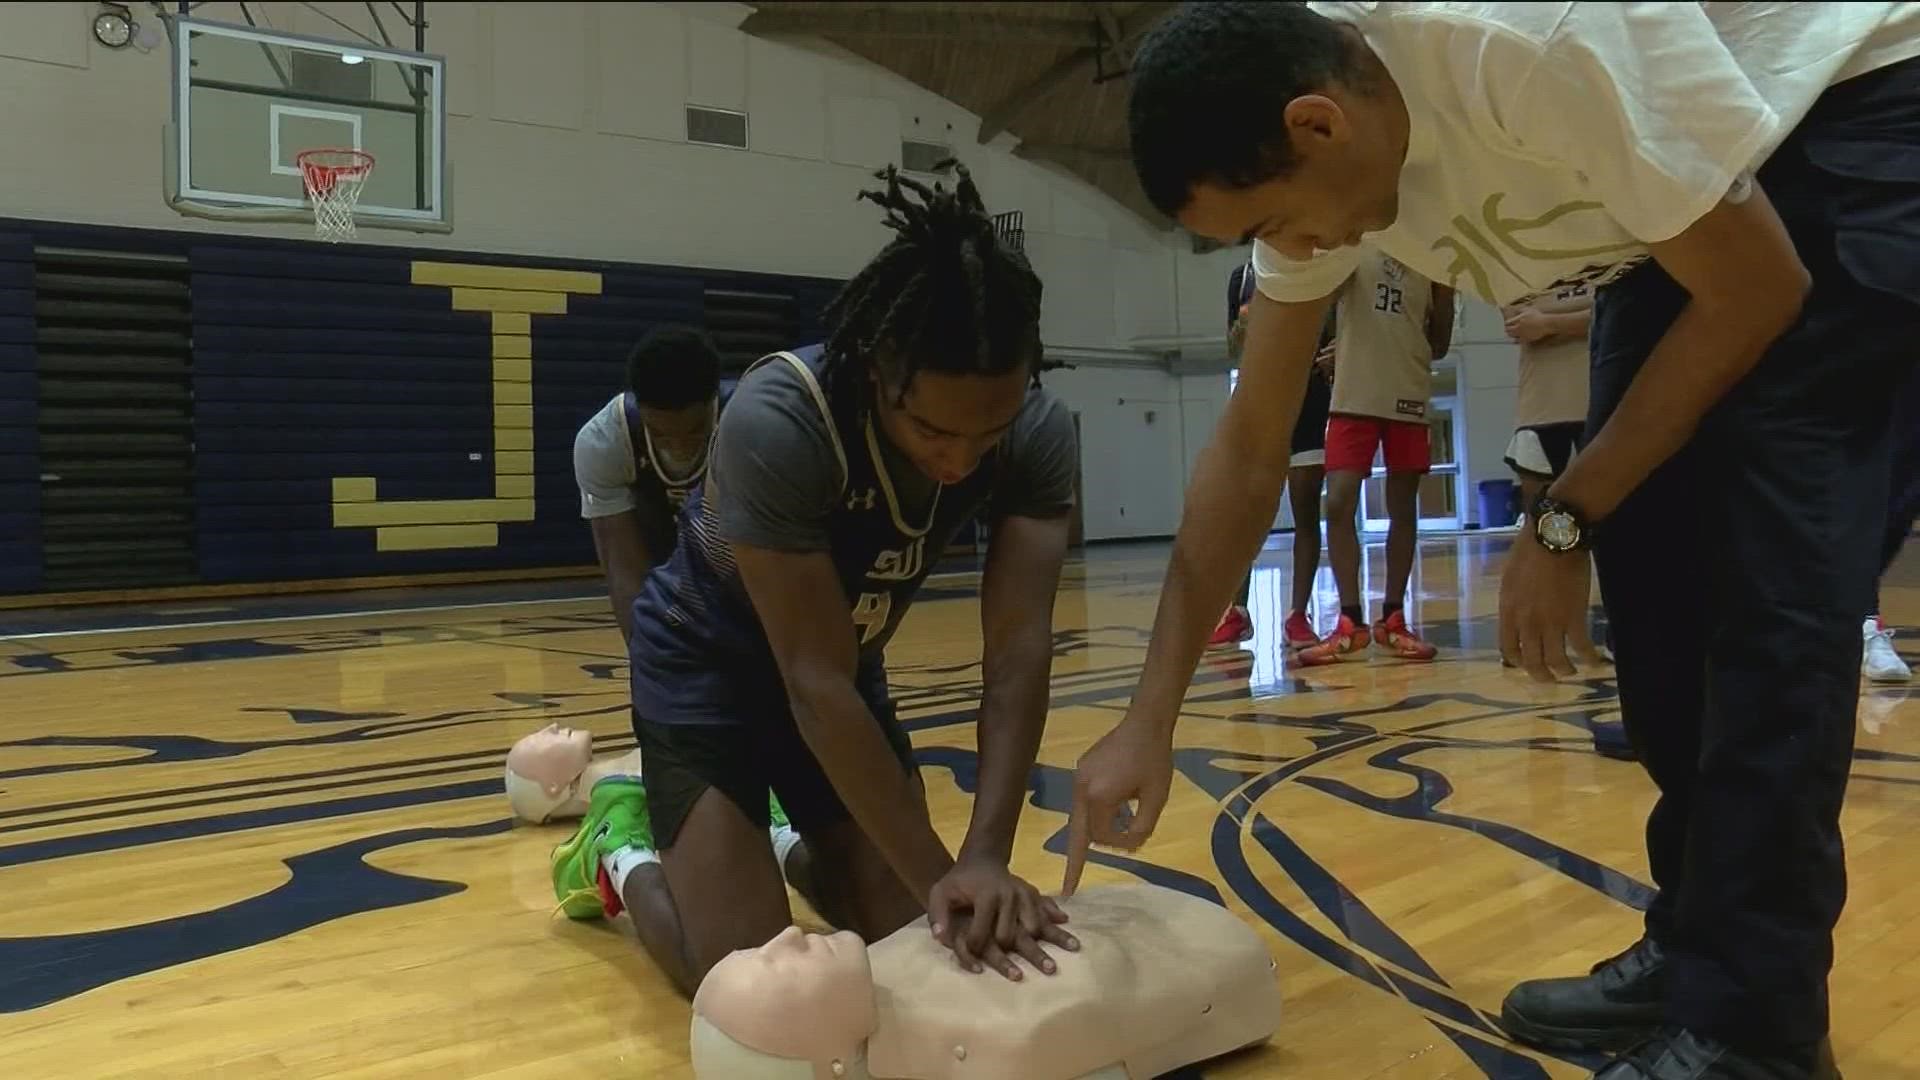 On Monday, St. John’s basketball players received training to potentially save a life from Toledo firefighter Myles Copeland.